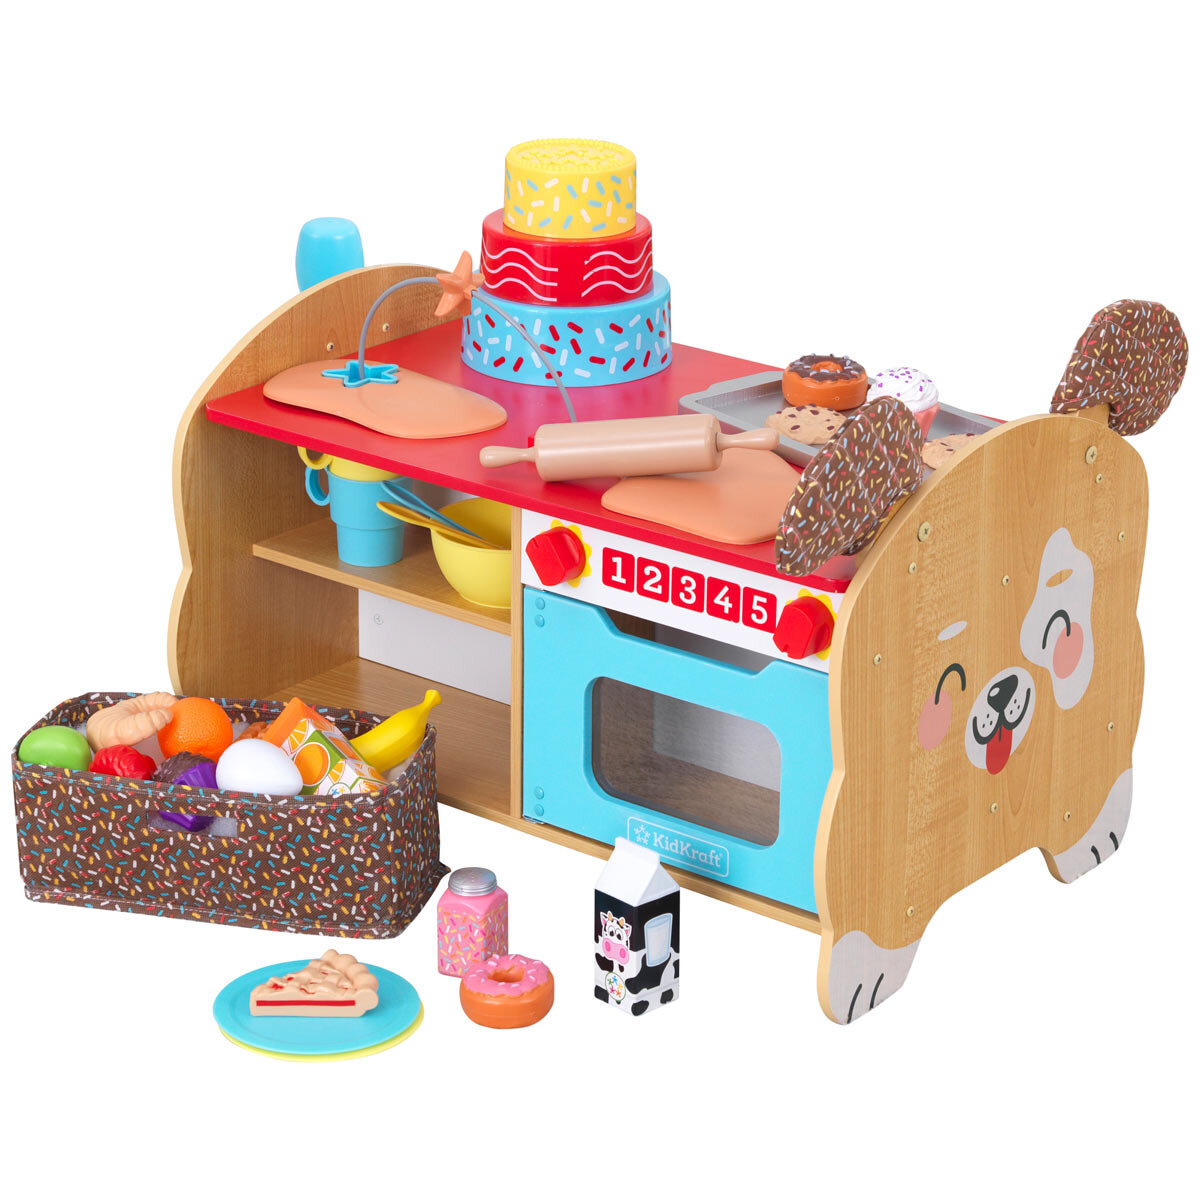 Buy KidKraft Foody Friends Deluxe Activity Center Overview2 Image at Costco.co.uk